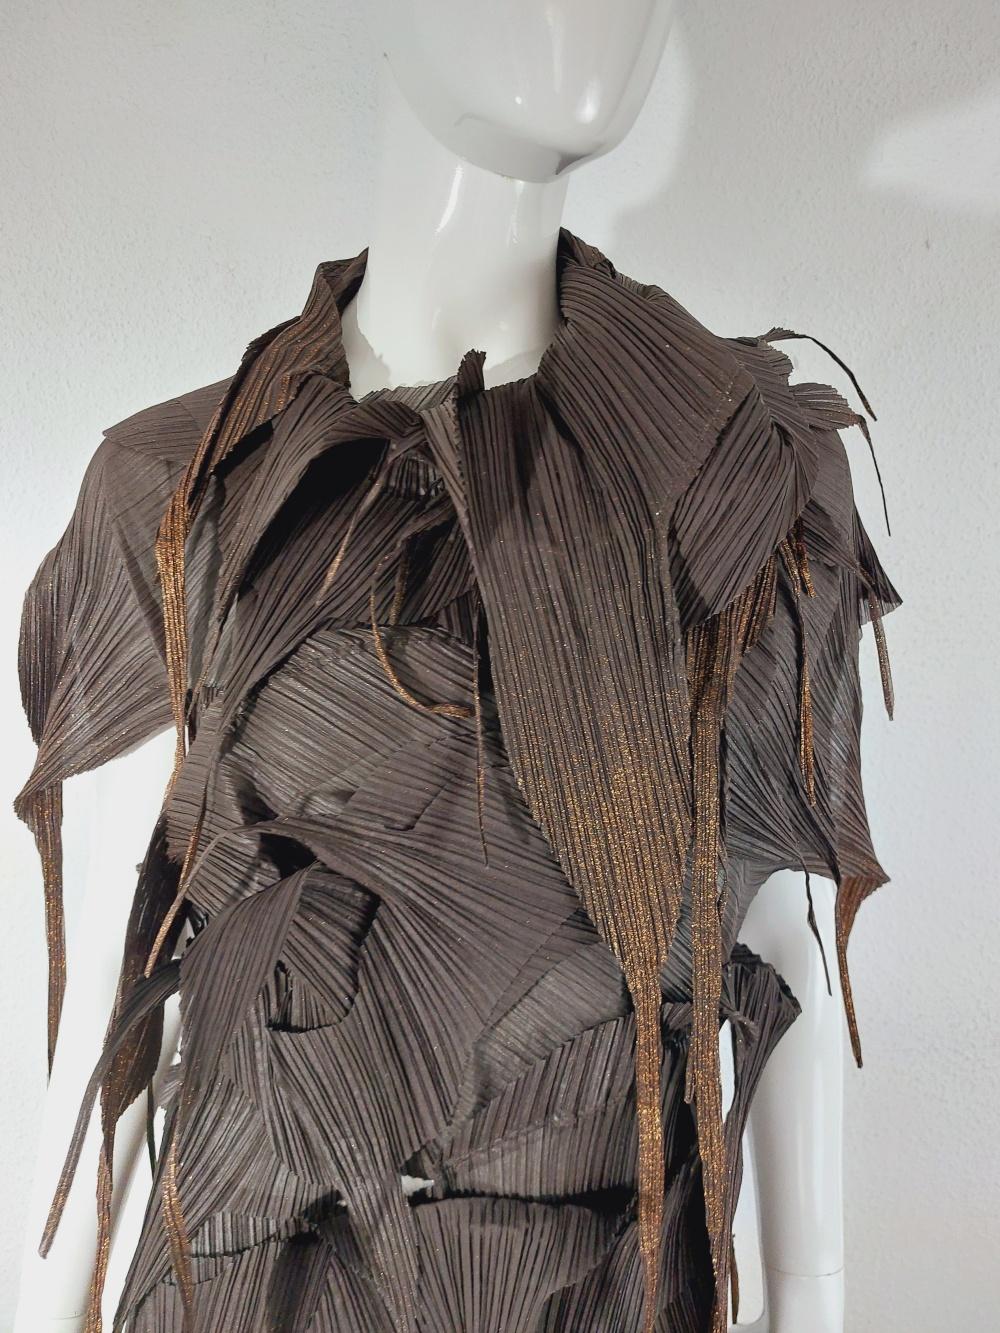 Issey Miyake Brown Gold Fringe Deconstructed Shredded Runway Japanese Kimono Geisha Pleats Please Dress Tunic

Excellent condition, collector brown/gold fringe Dress from Issey Miyke.

Excellent condition, marked 2. Fits for all sizes, elastic